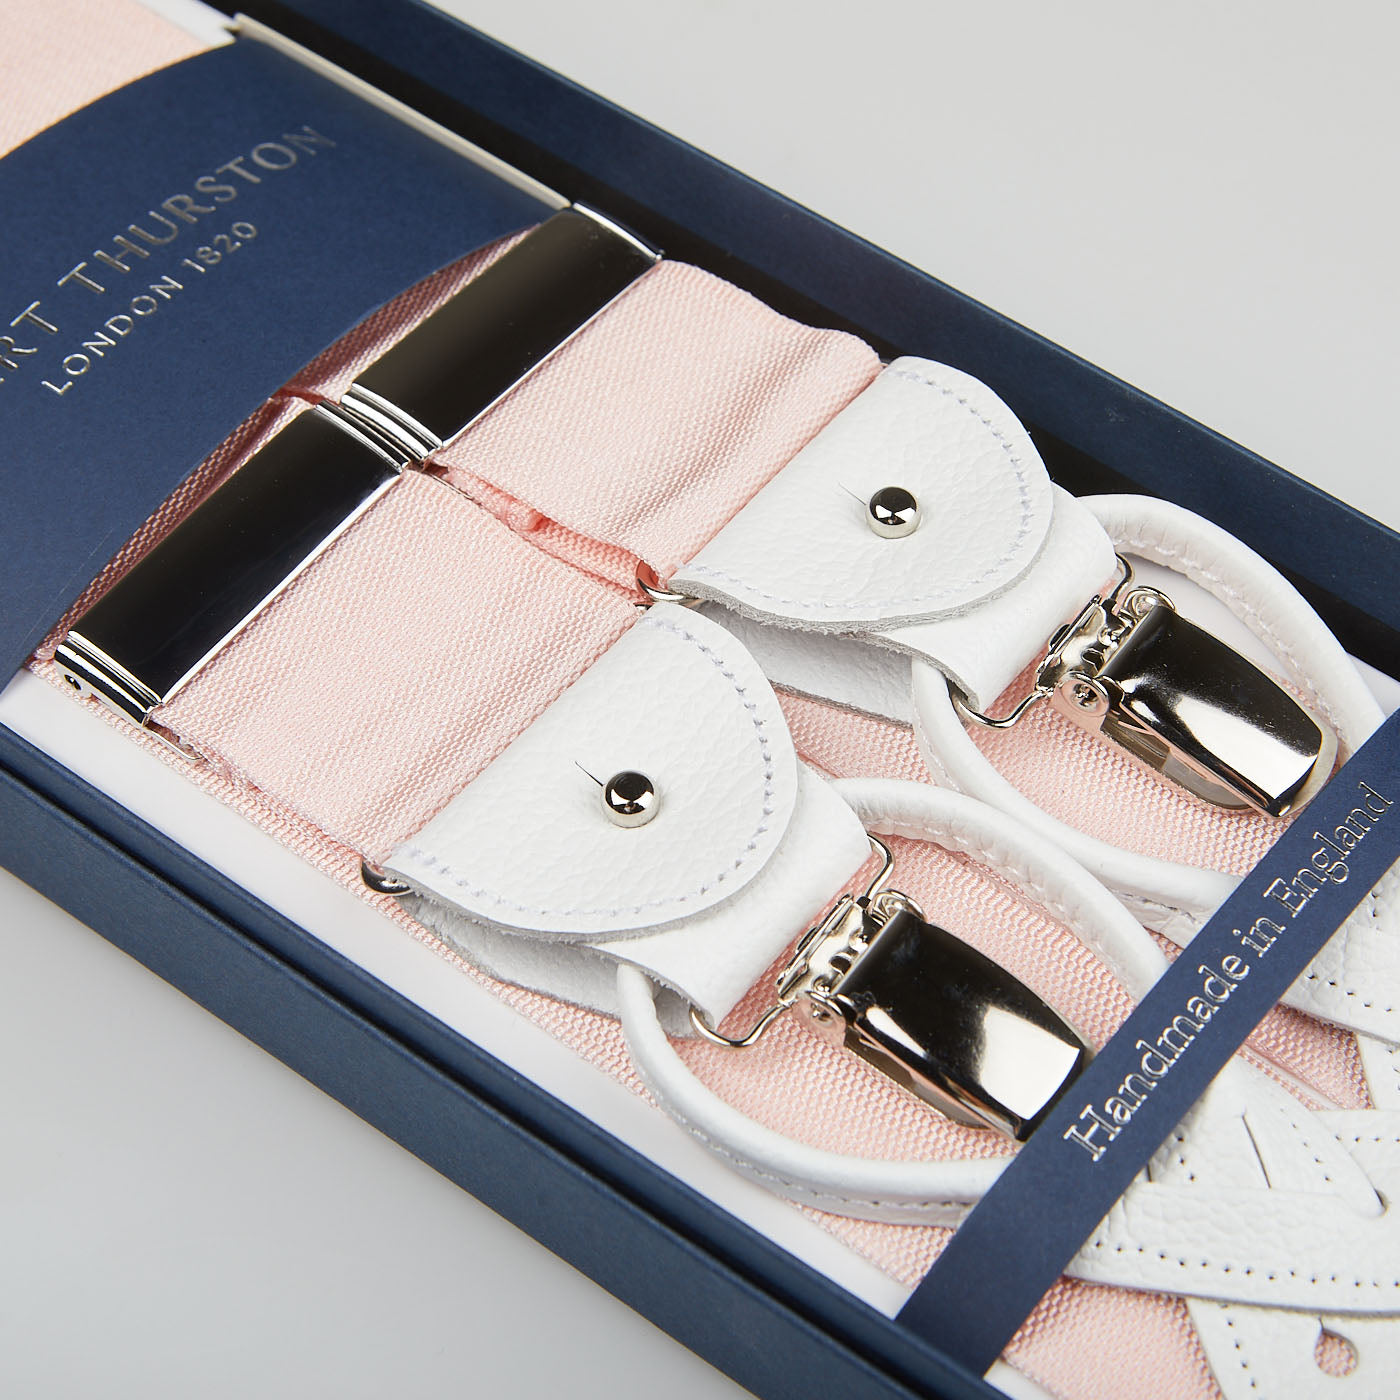 Pink and white handmade Light Pink Nylon White Leather 40 mm braces with silver clips and leather details, presented in an open blue box with the brand name "Albert Thurston London 1893" visible.